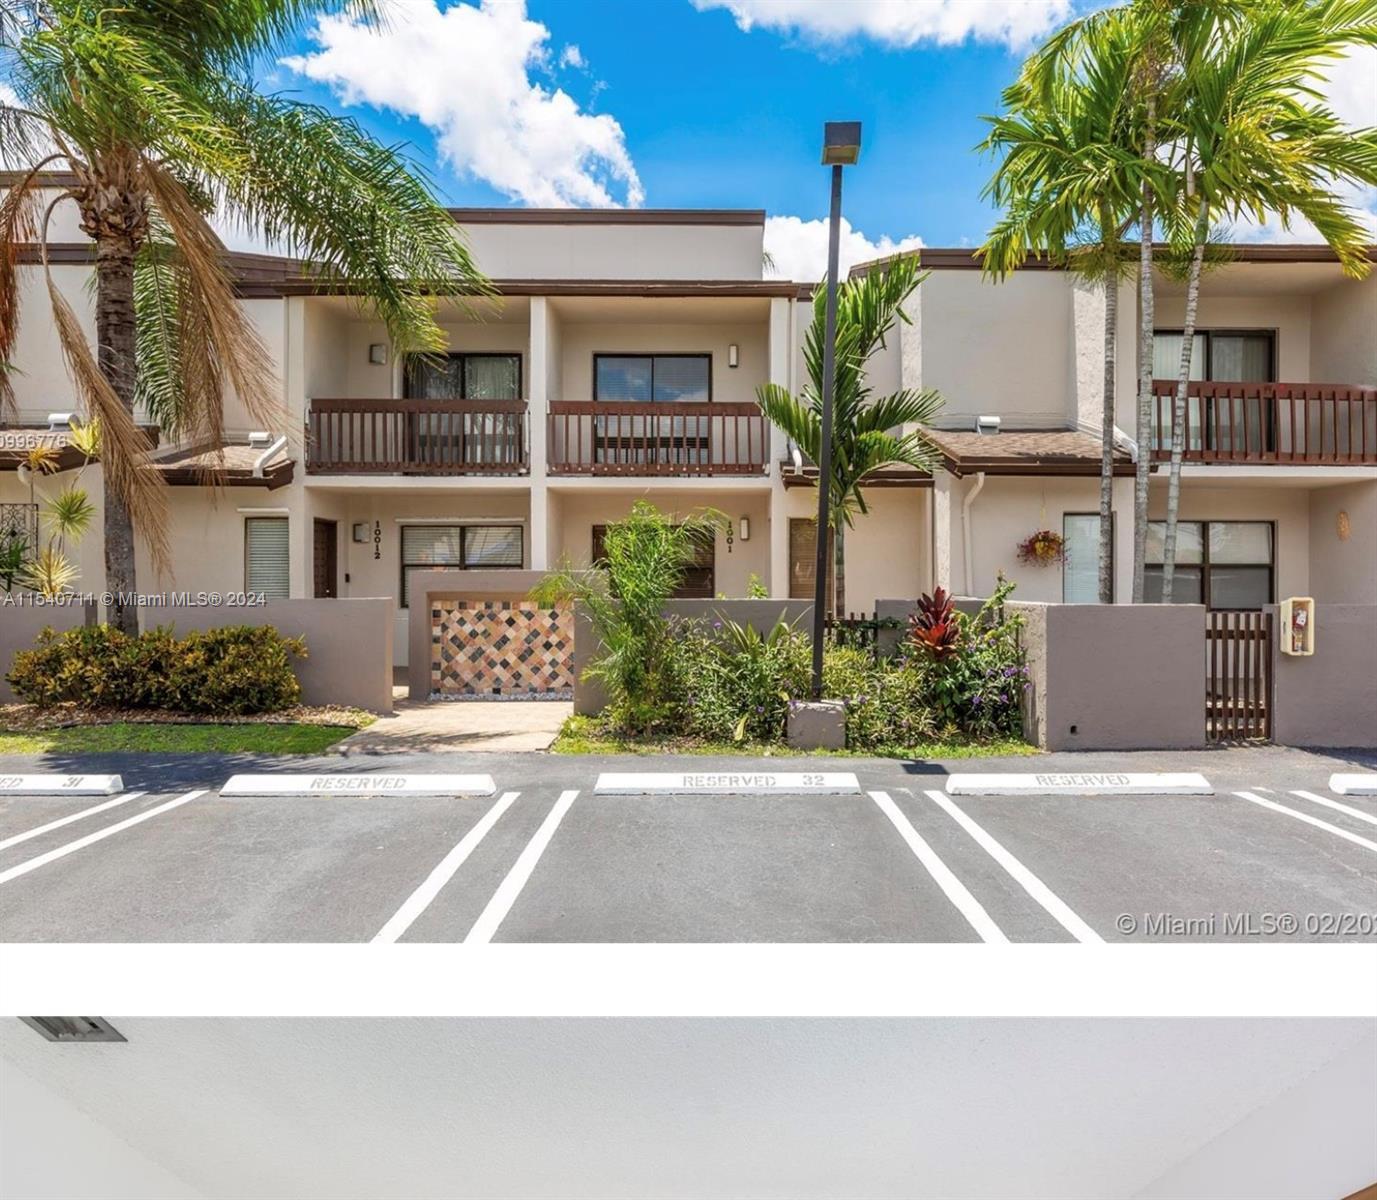 Photo of 10014 NW 41st St #32 in Doral, FL